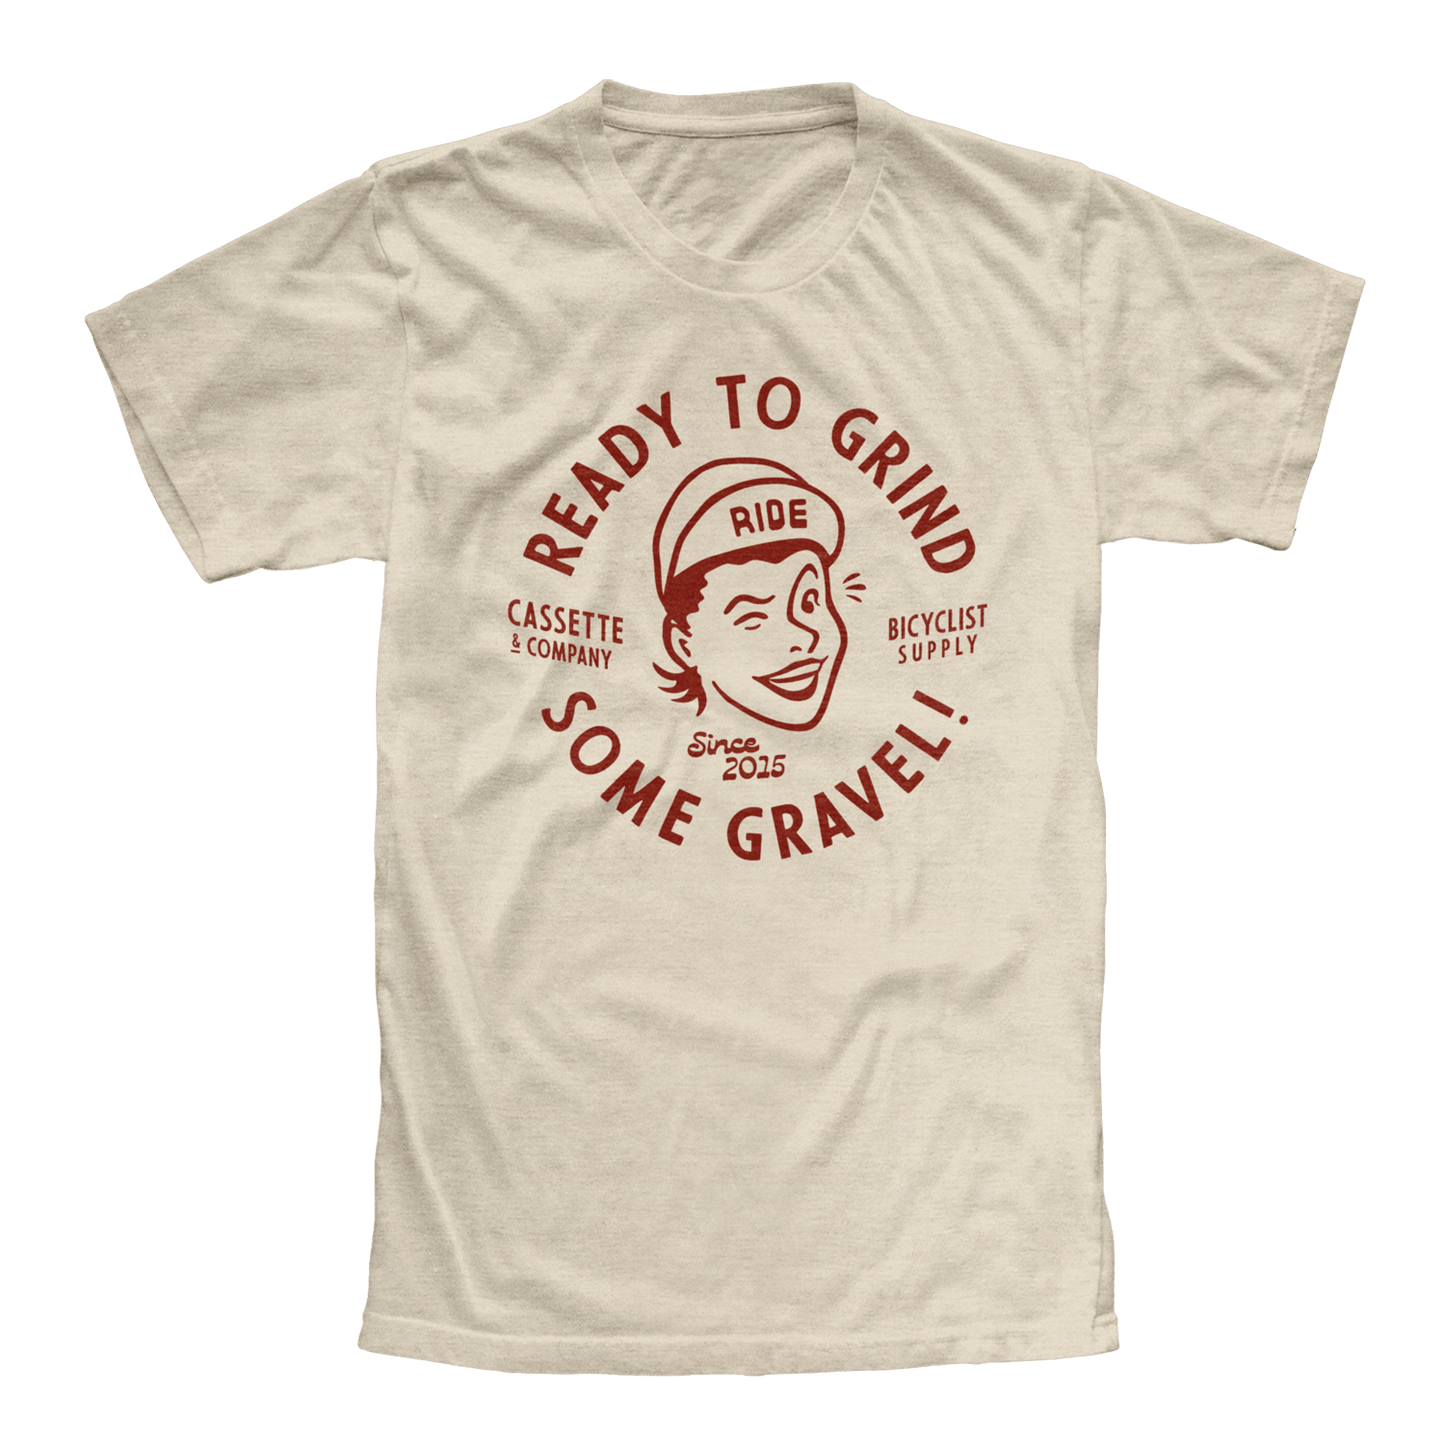 Women's specific tee with one color print with vintage graphic for gravel cyclists